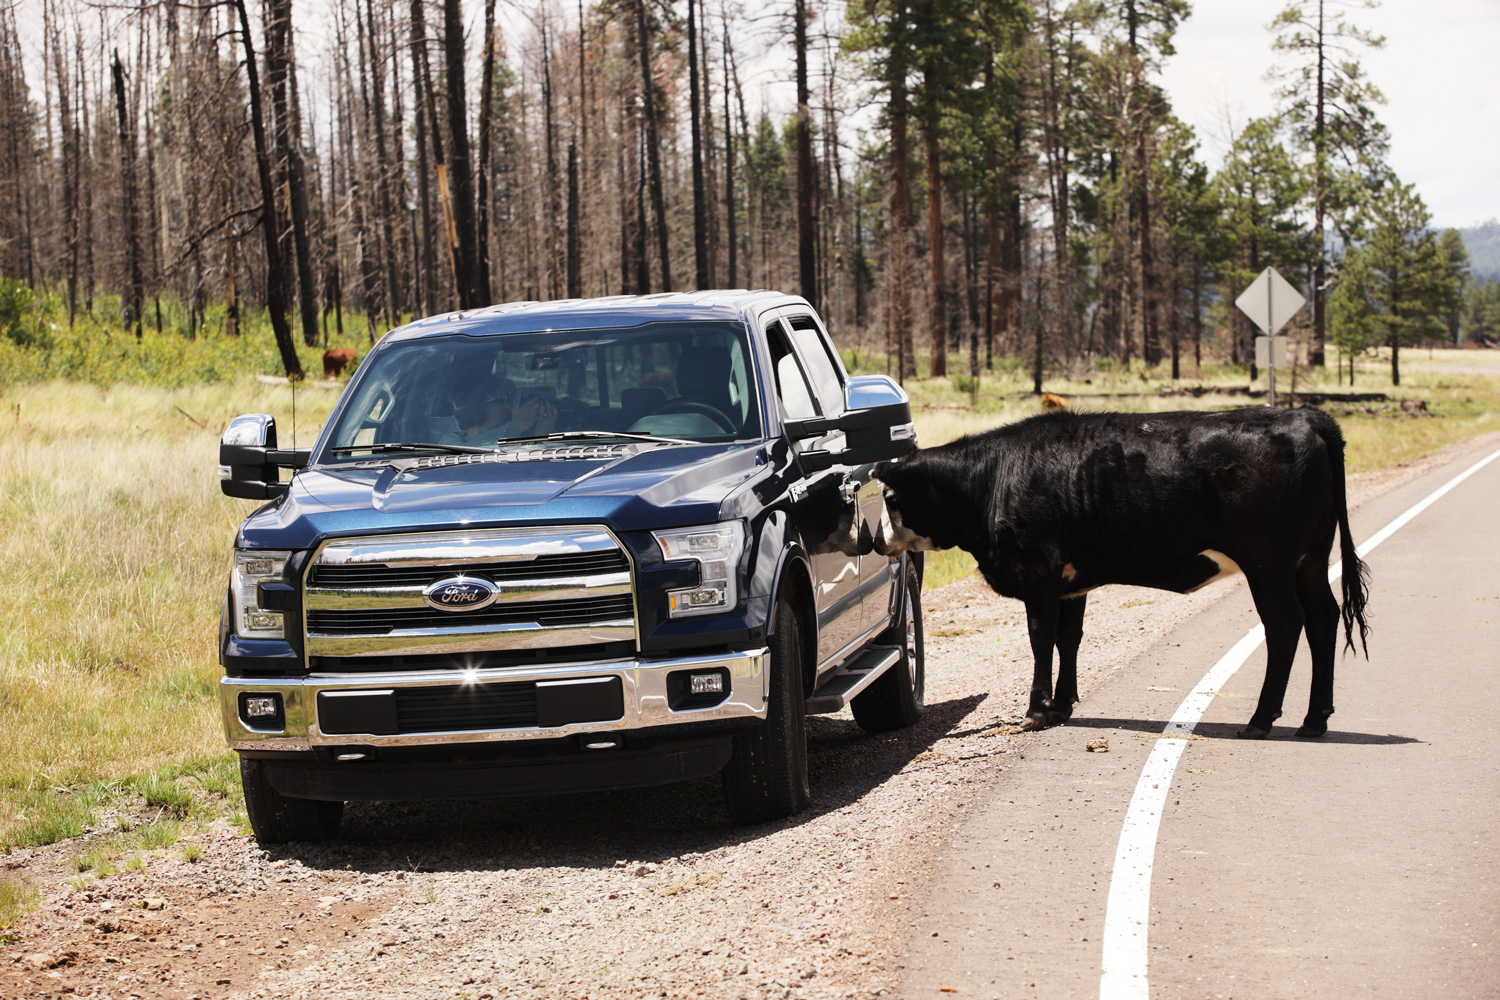 A curious cow sees her reflection in the side of a 2015 Ford F150 truck and goes nose to nose to investigate 